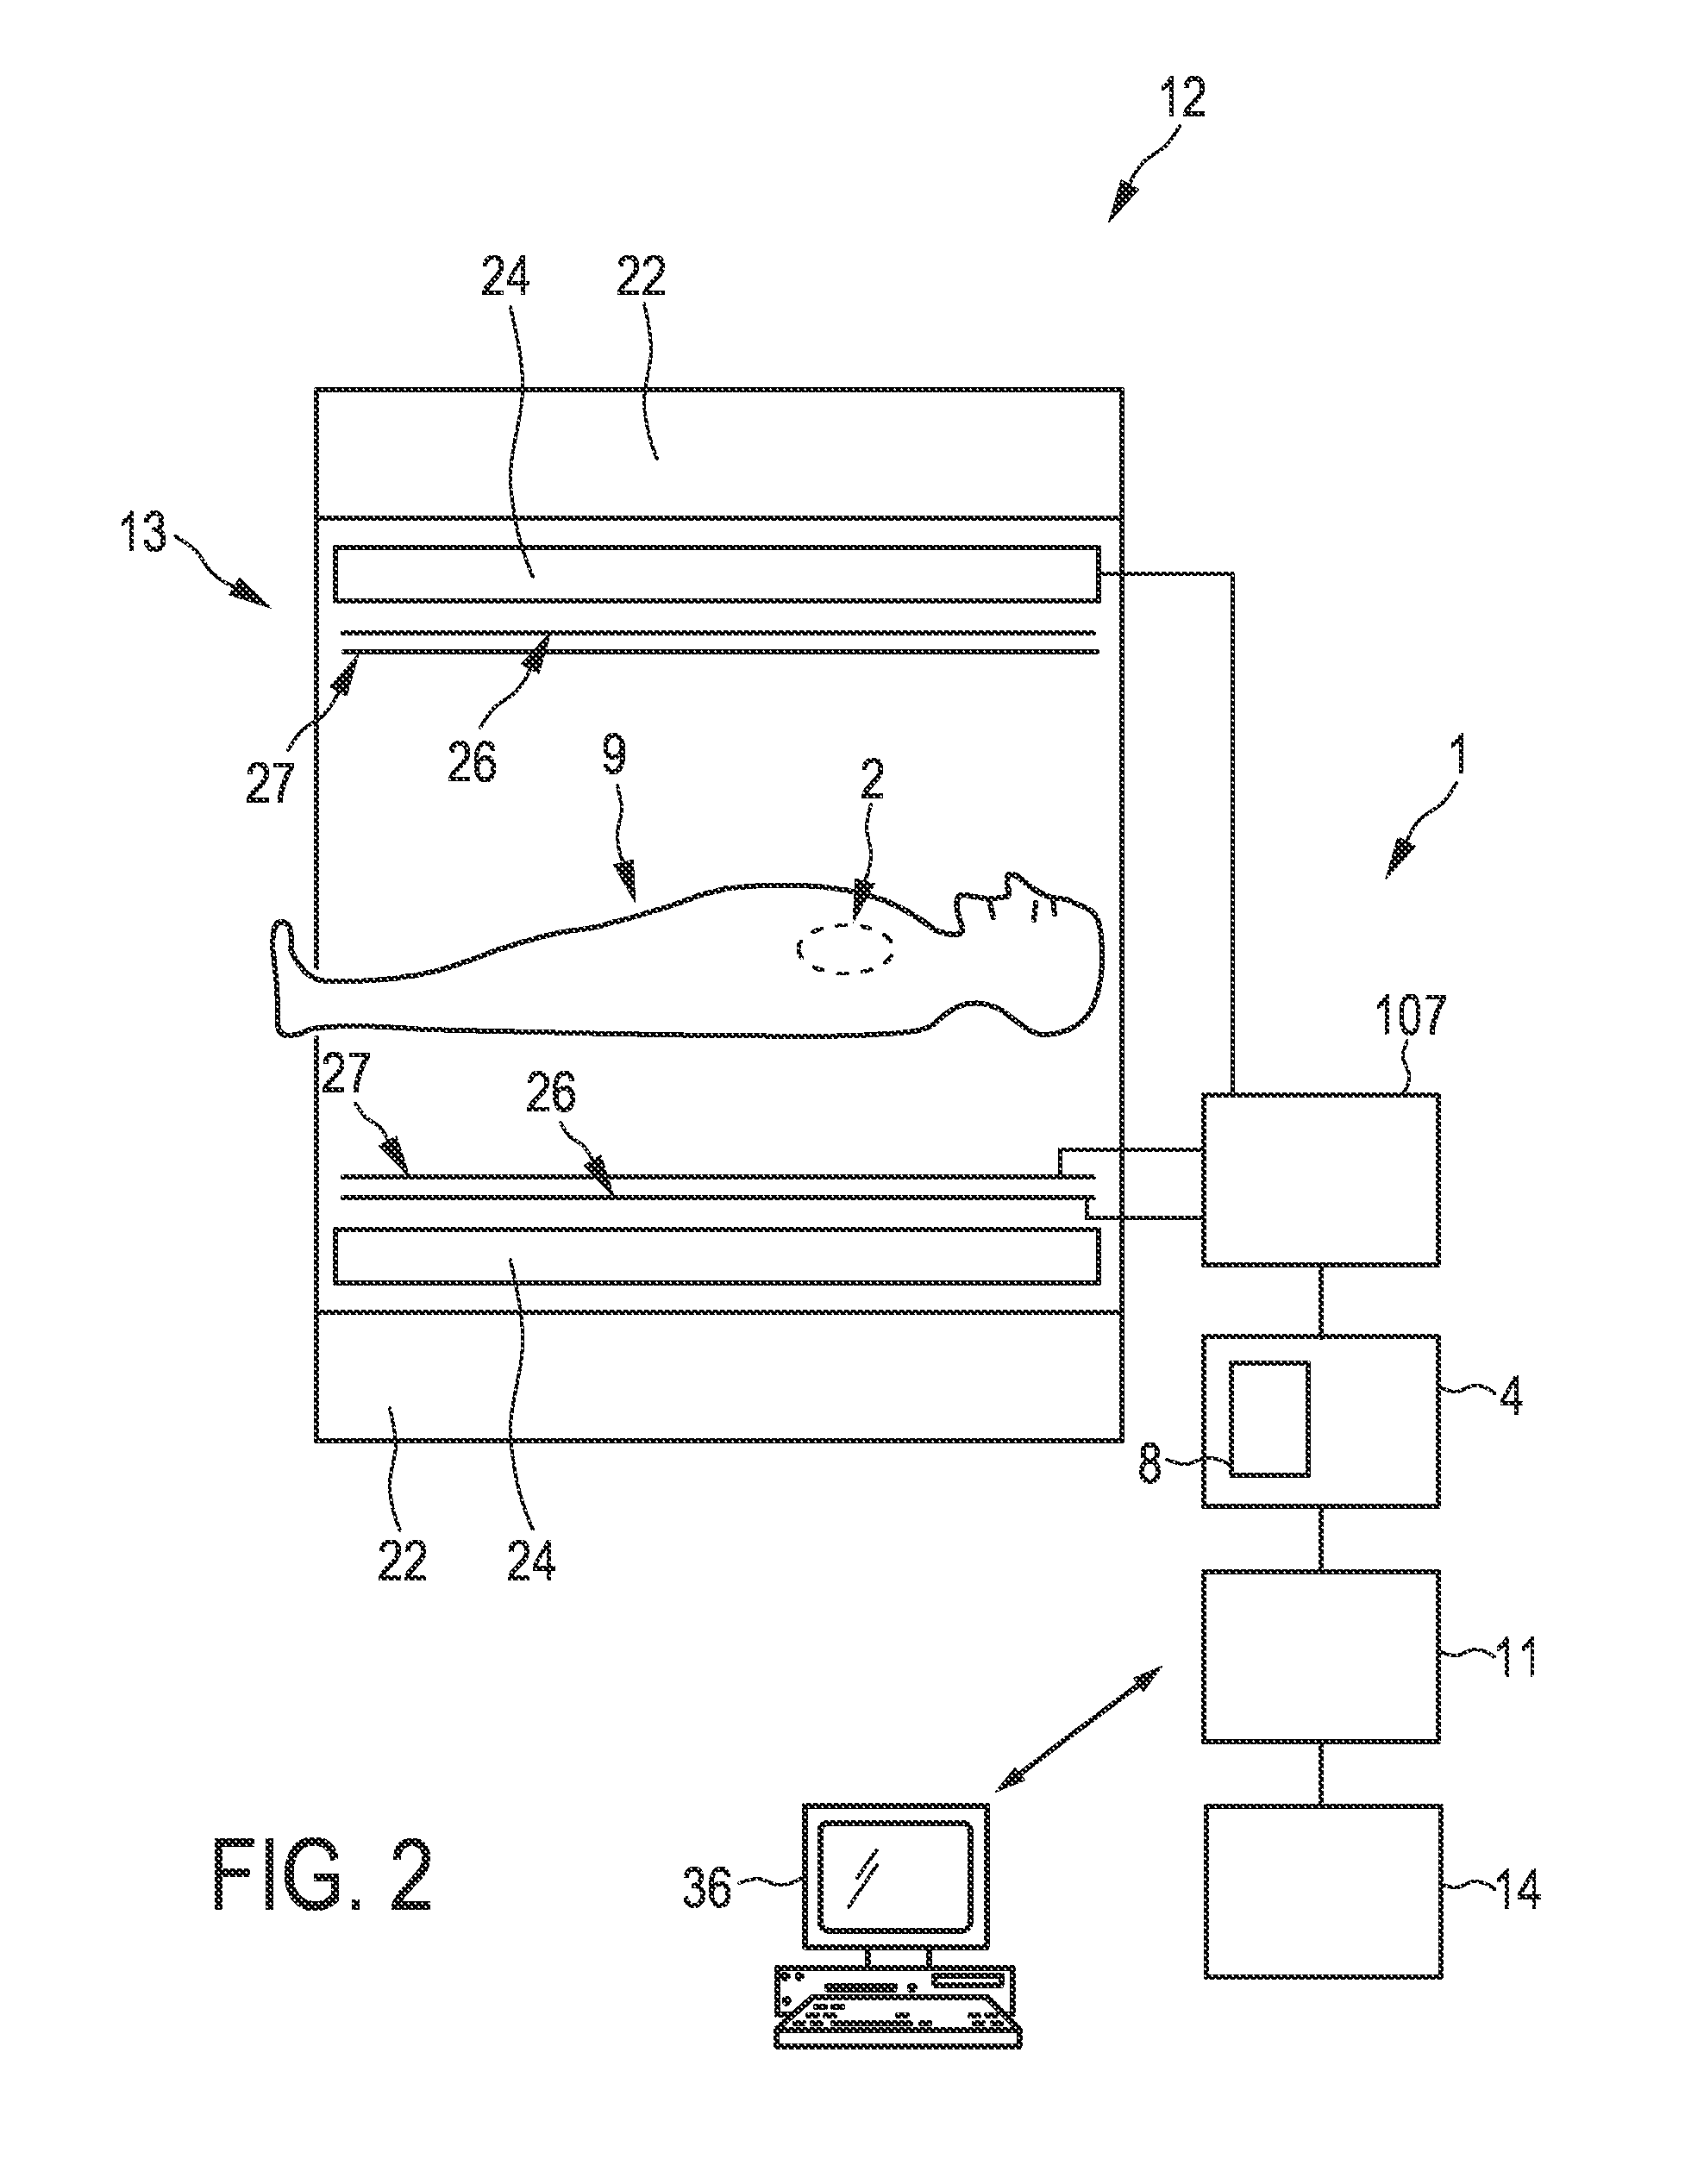 Motion monitoring system for monitoring motion within a region of interest